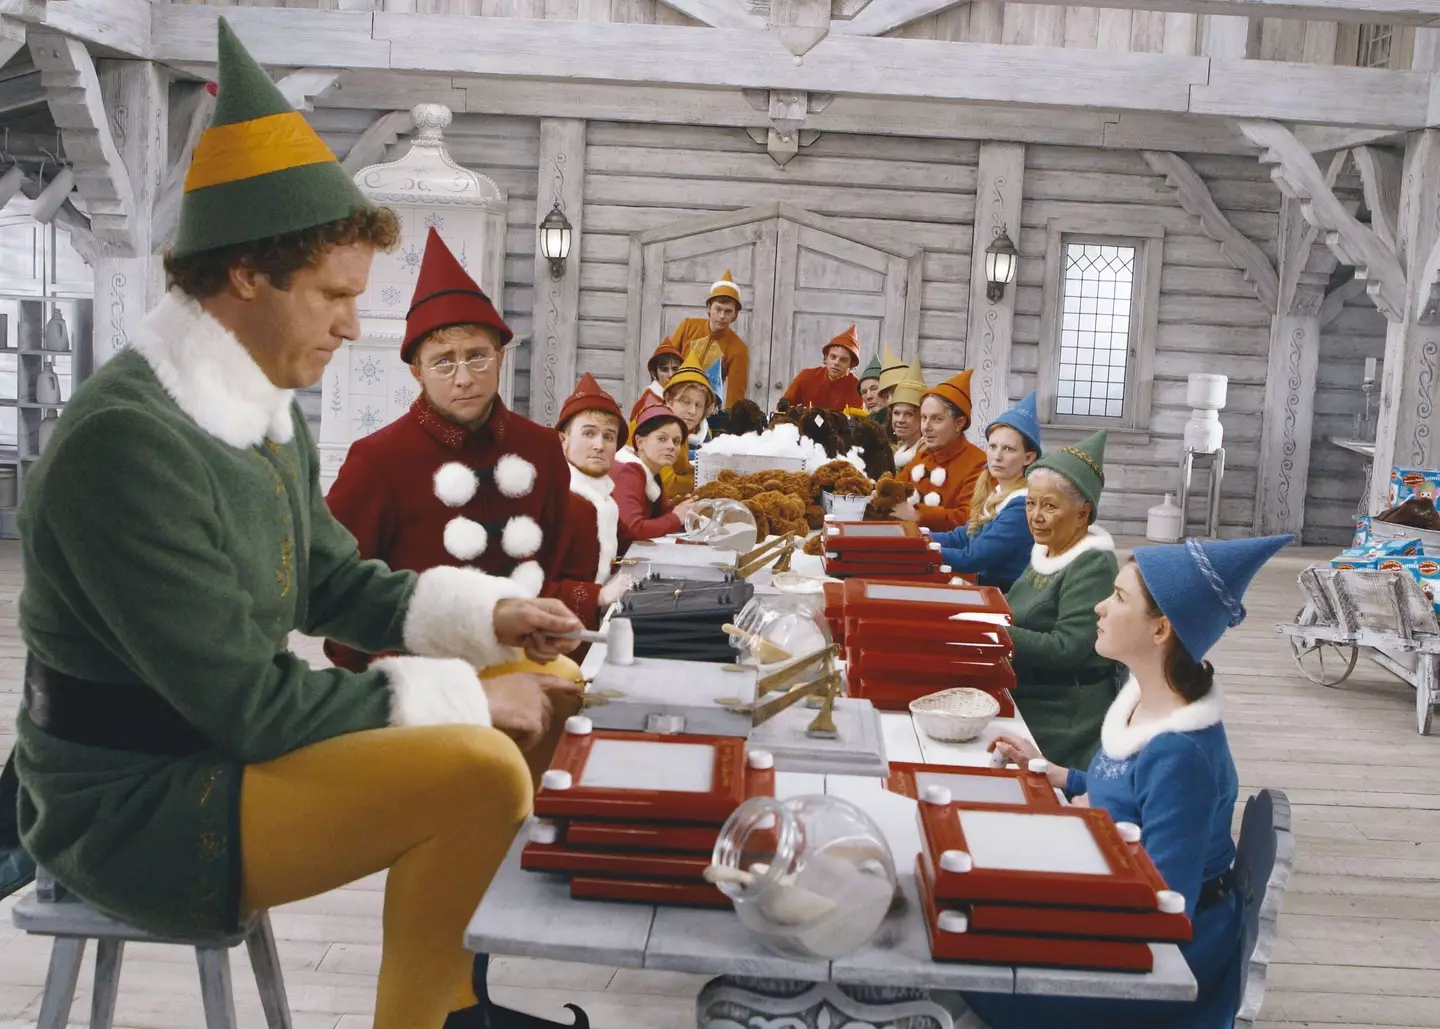 Peter Billingsley (red suit) also appeared in 2003's Elf.